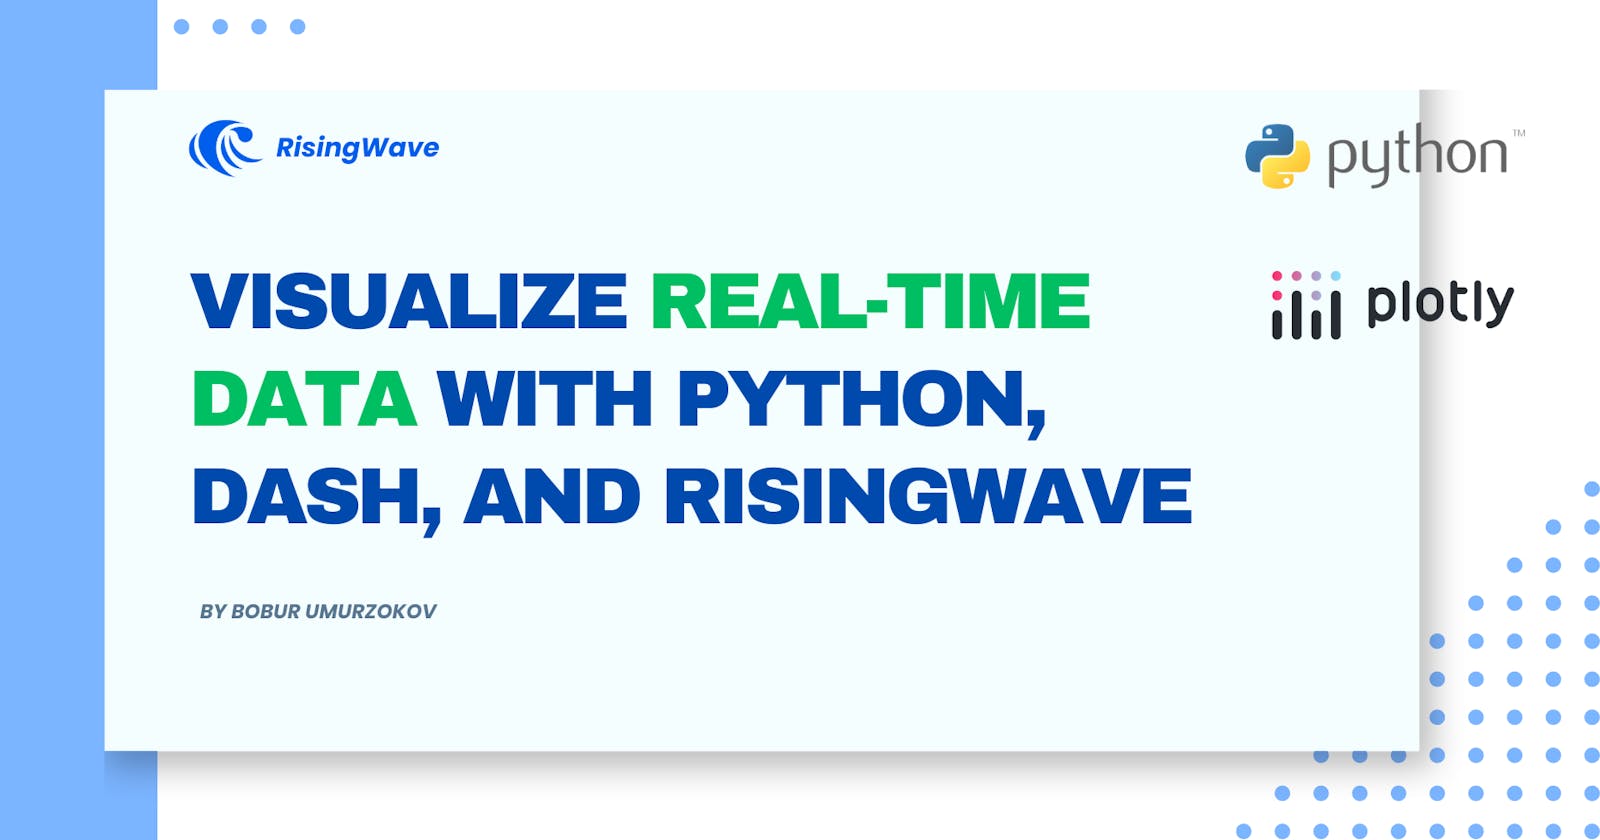 Visualize Real-Time Data With Python, Dash, and RisingWave